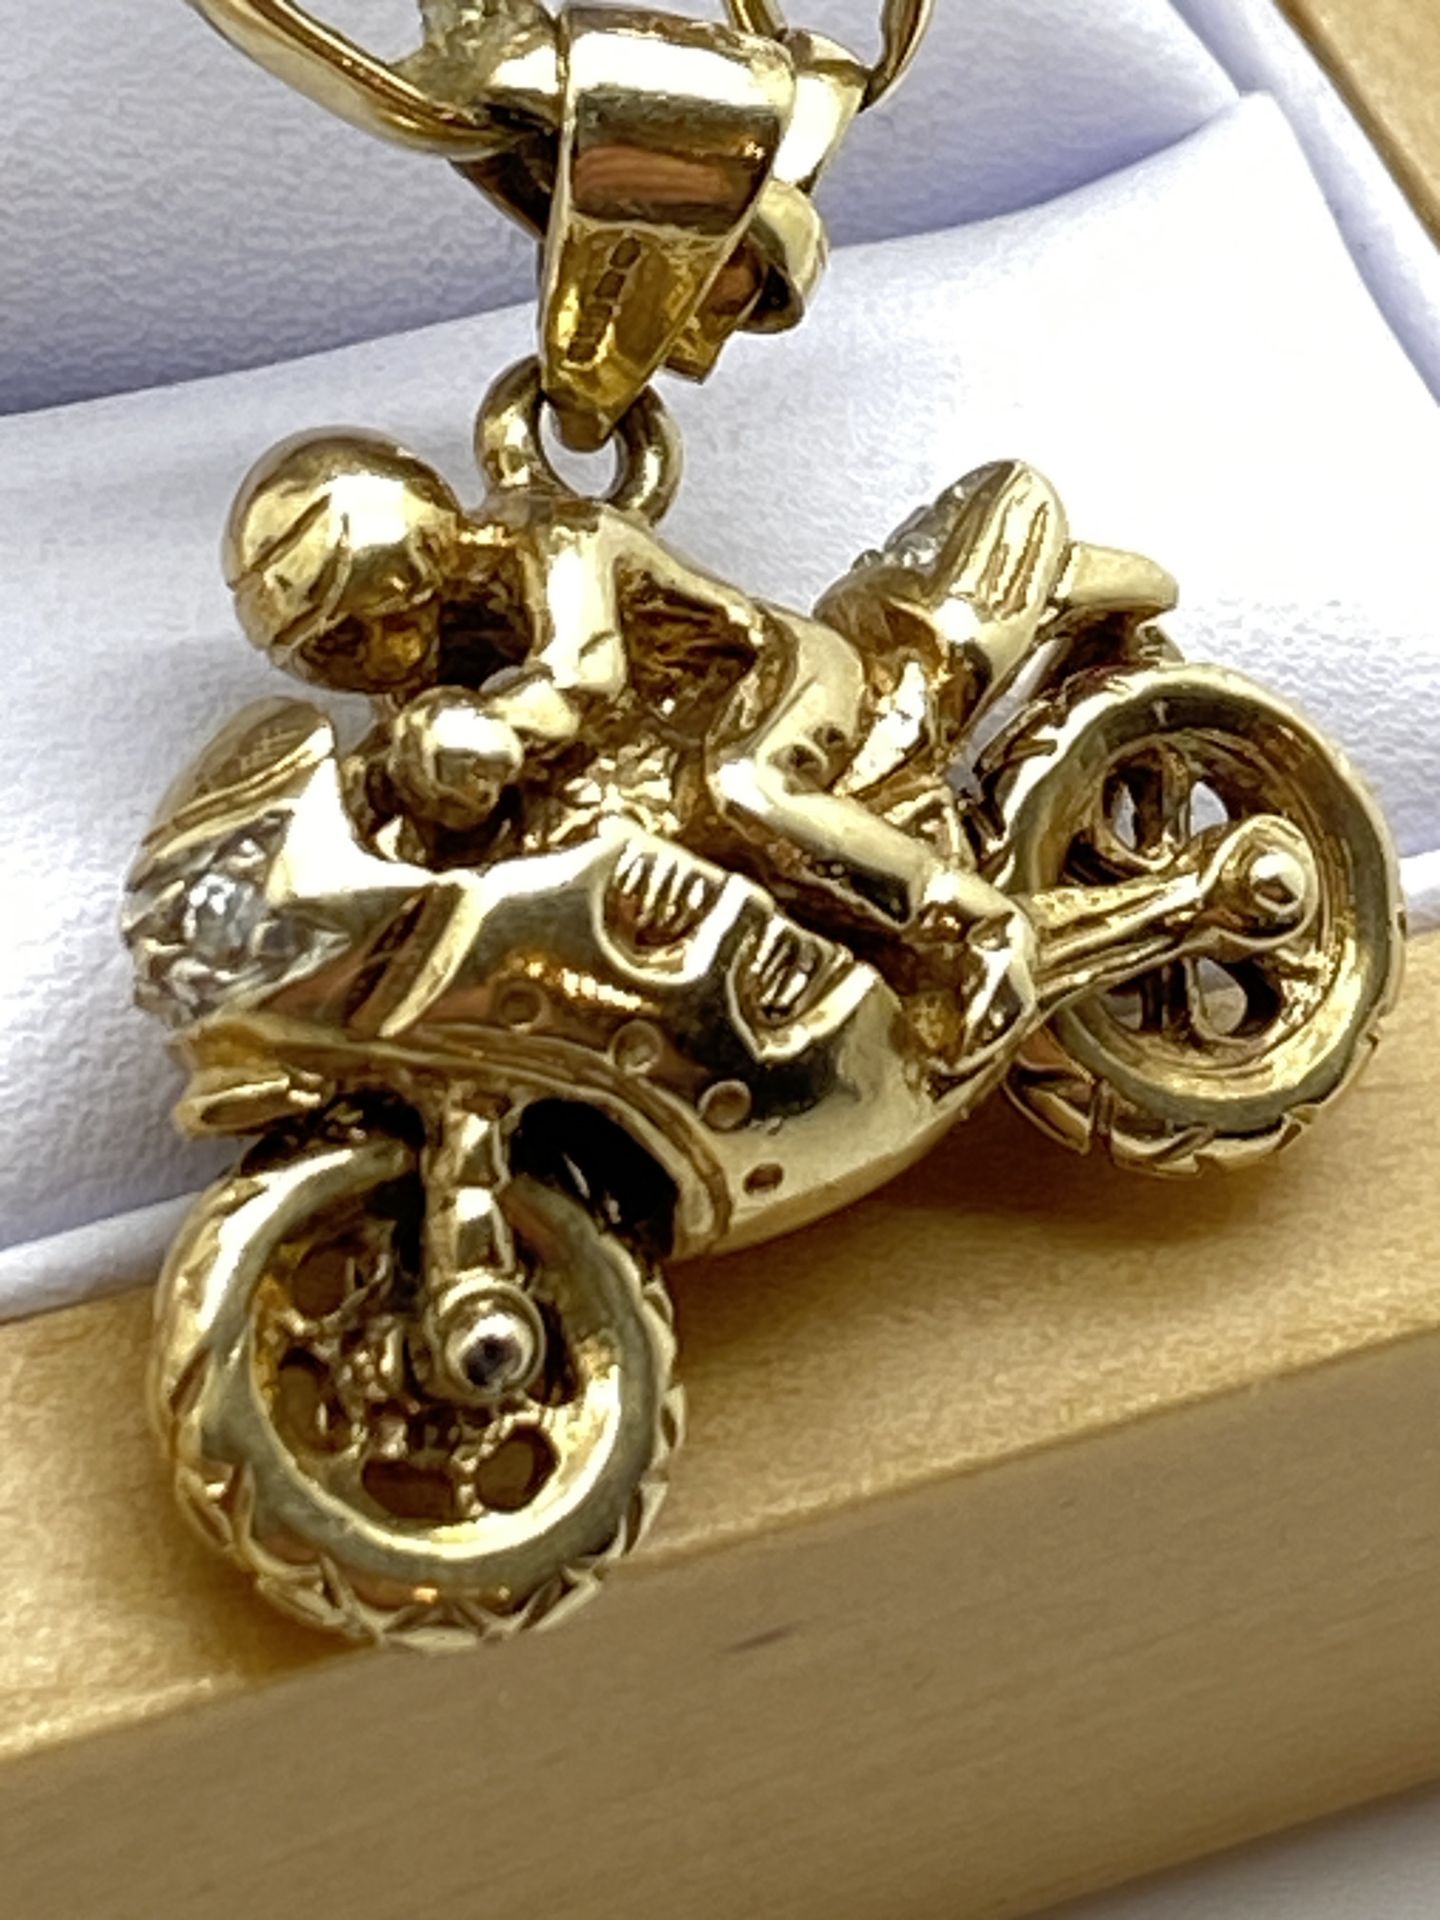 FINE 9ct GOLD BESPOKE DIAMOND / RUBY SET MOTORBIKE PENDANT WITH 9ct GOLD CHAIN OVER 30 GRAMS - Image 2 of 4